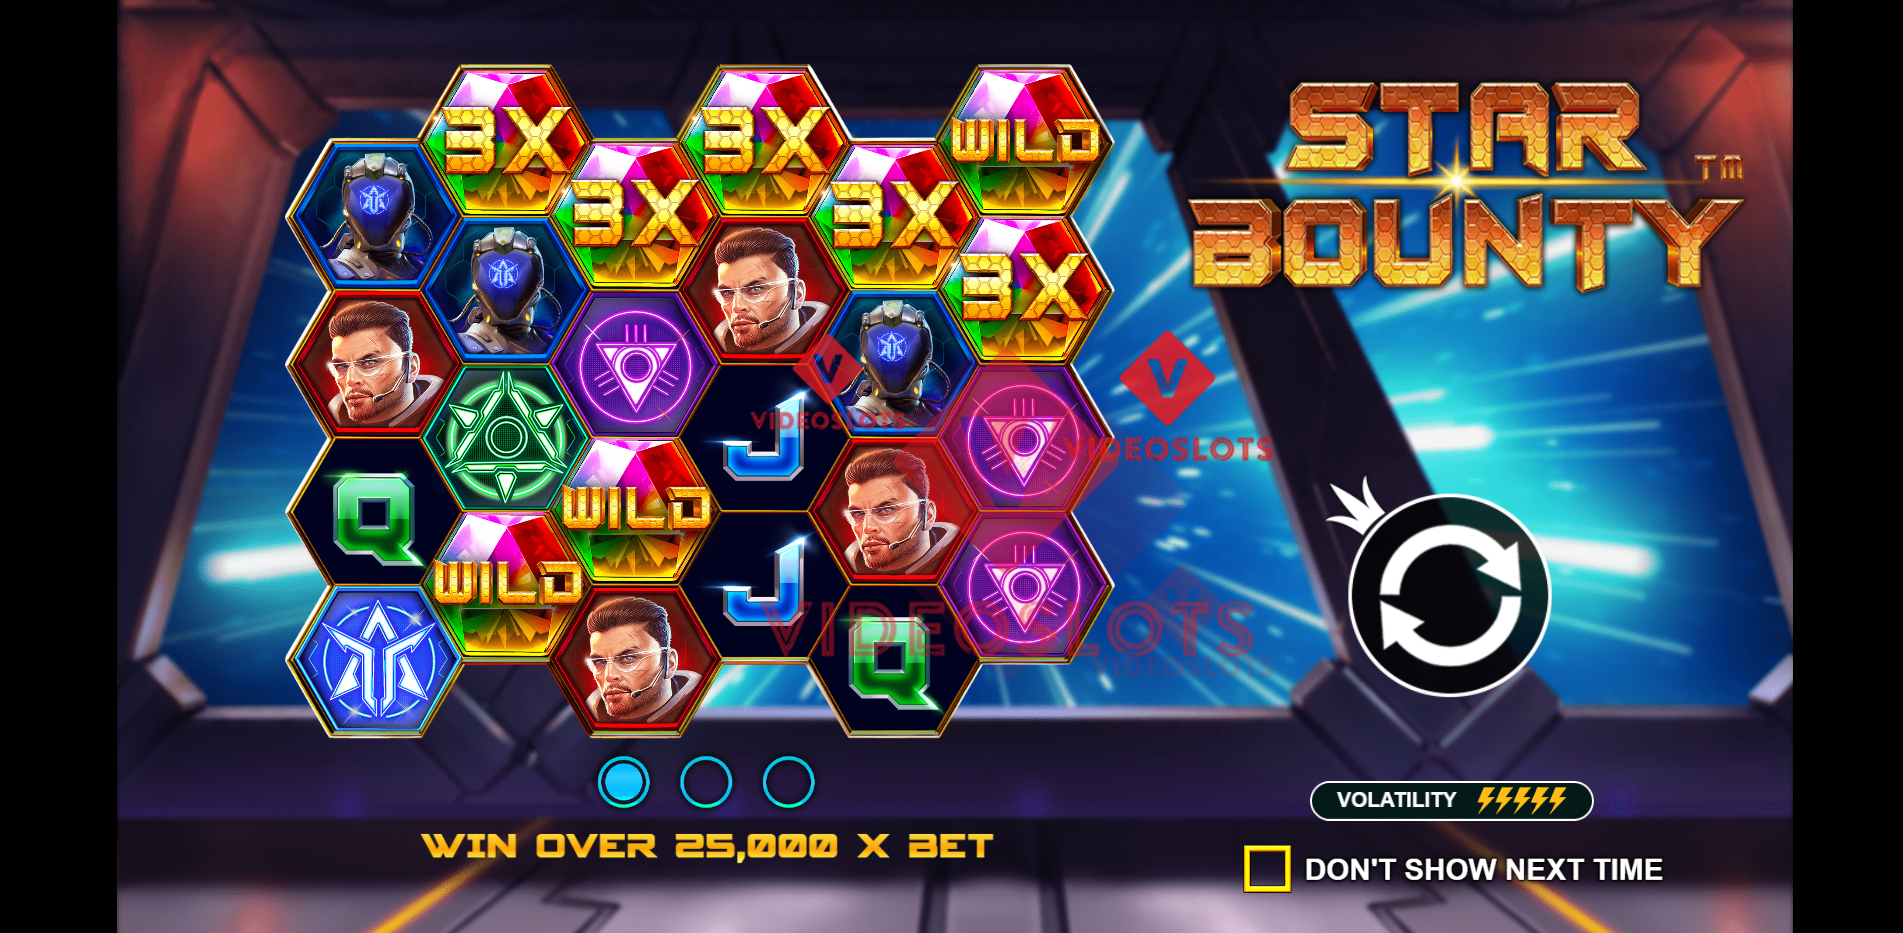 Game Intro for Star Bounty slot by Pragmatic Play